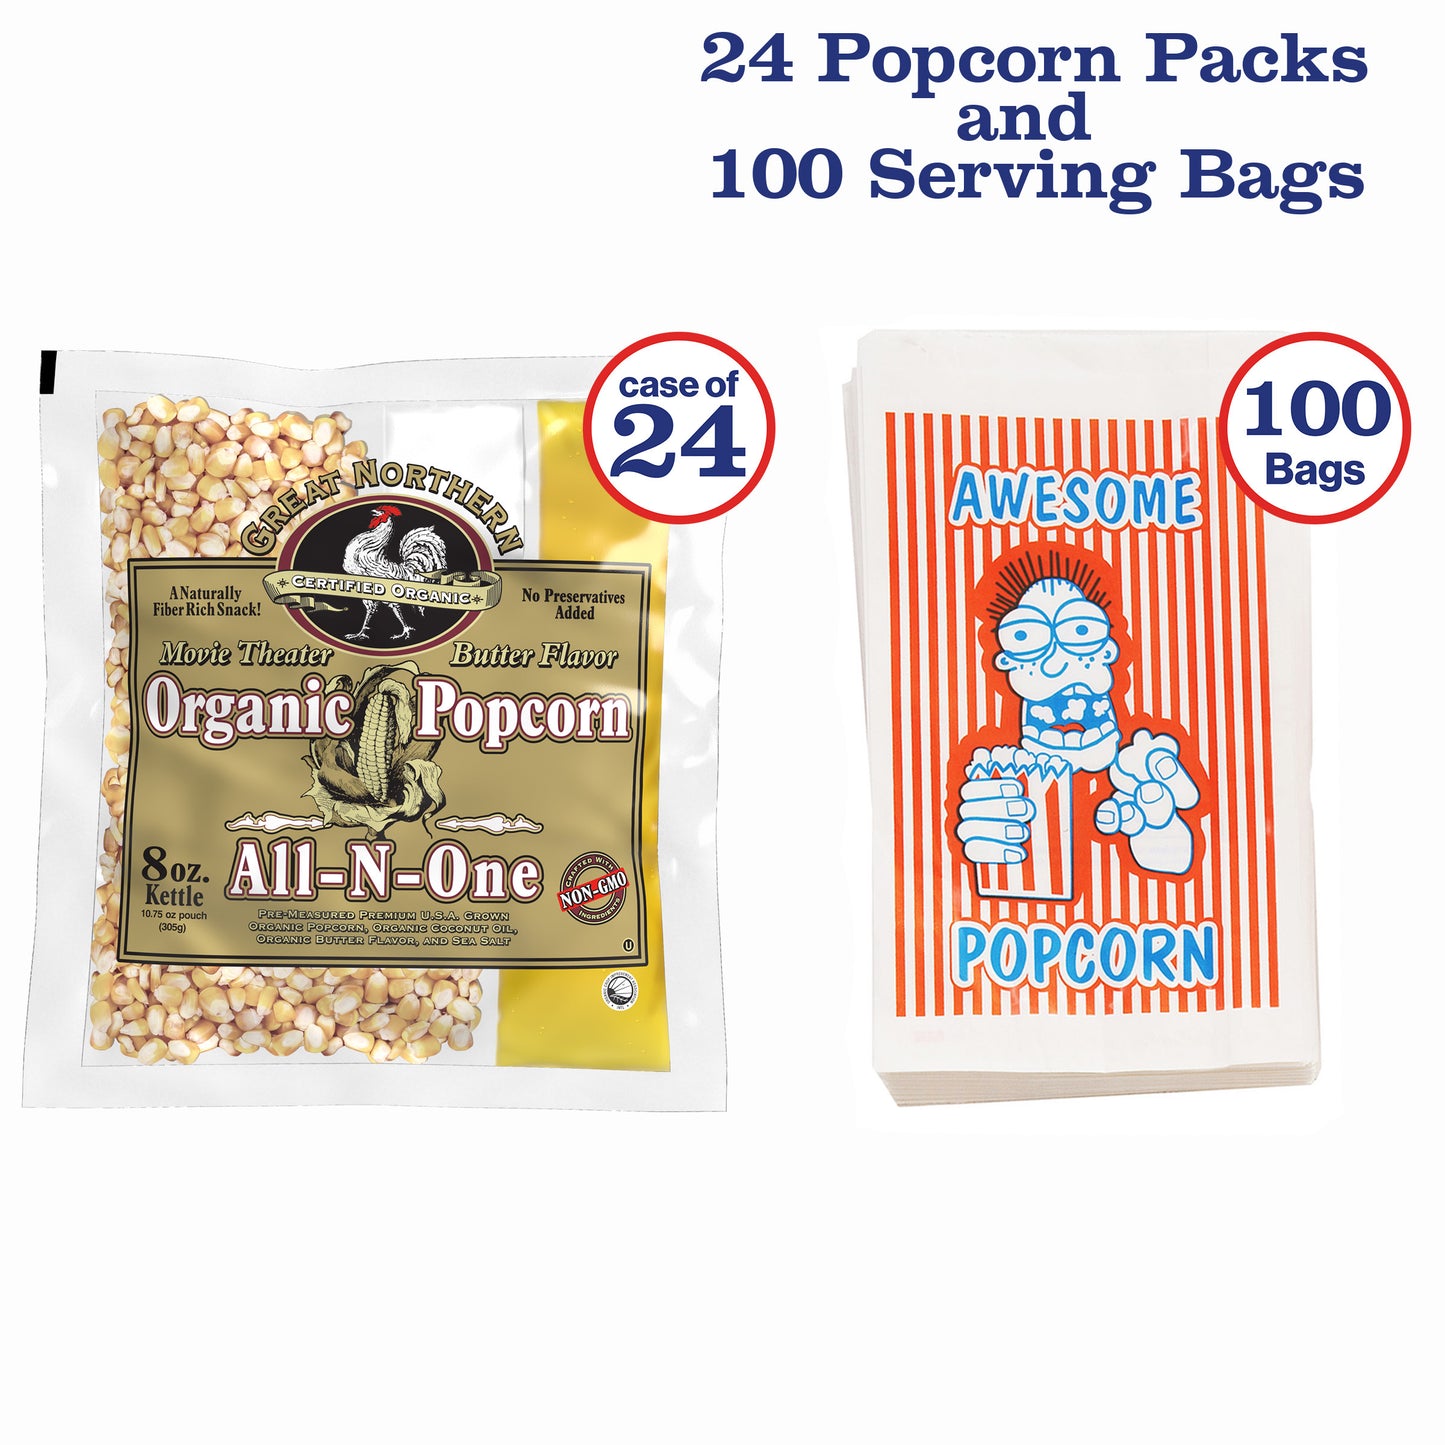 100 Popcorn Bags and 8 Ounce All-in-One Organic Popcorn Packs  – Case of 24